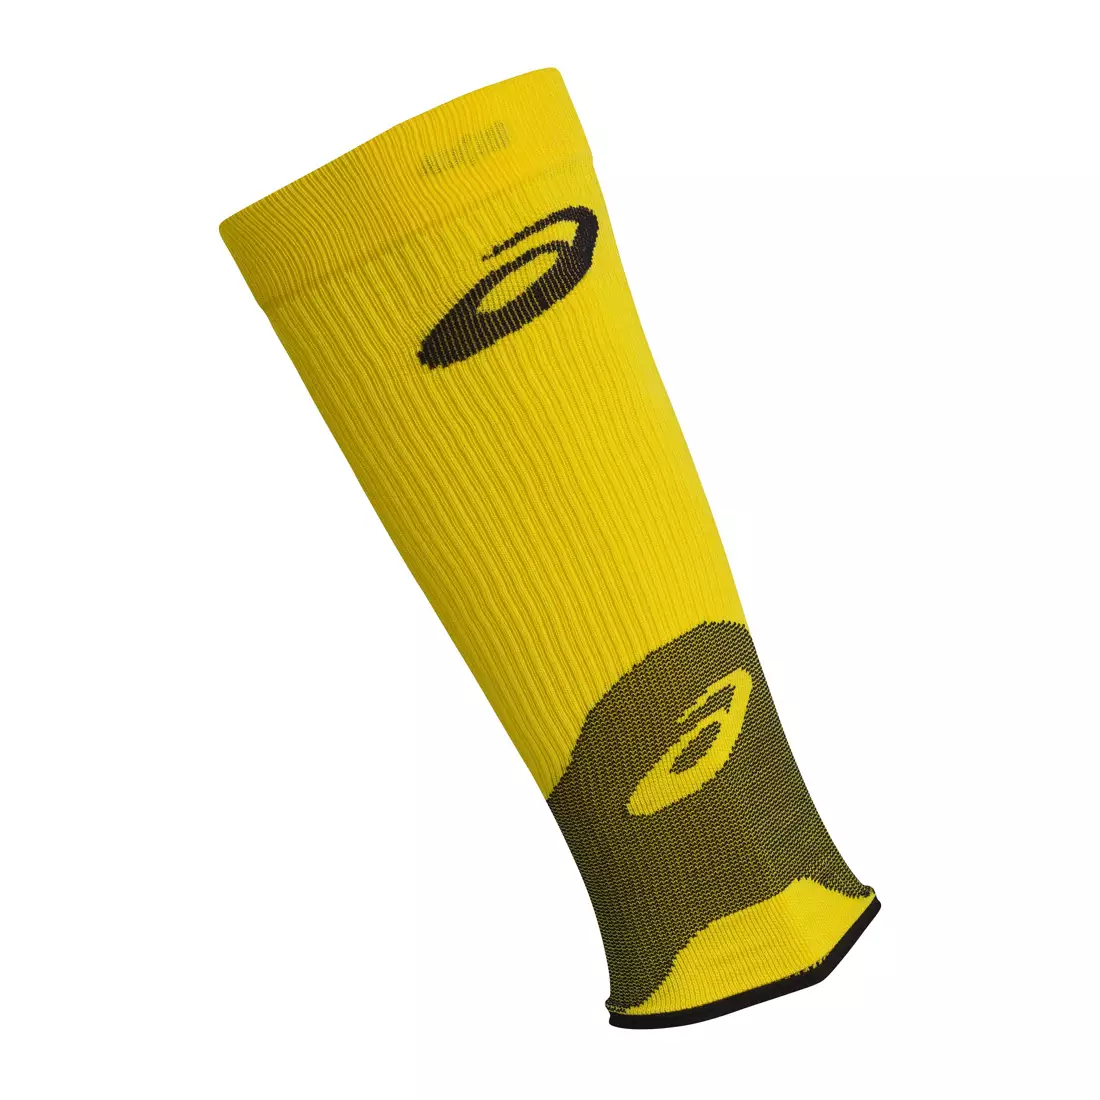 ASICS 110526-0343 COMPRESSION CALF SLEEVE - calf compression sleeves, color: Yellow